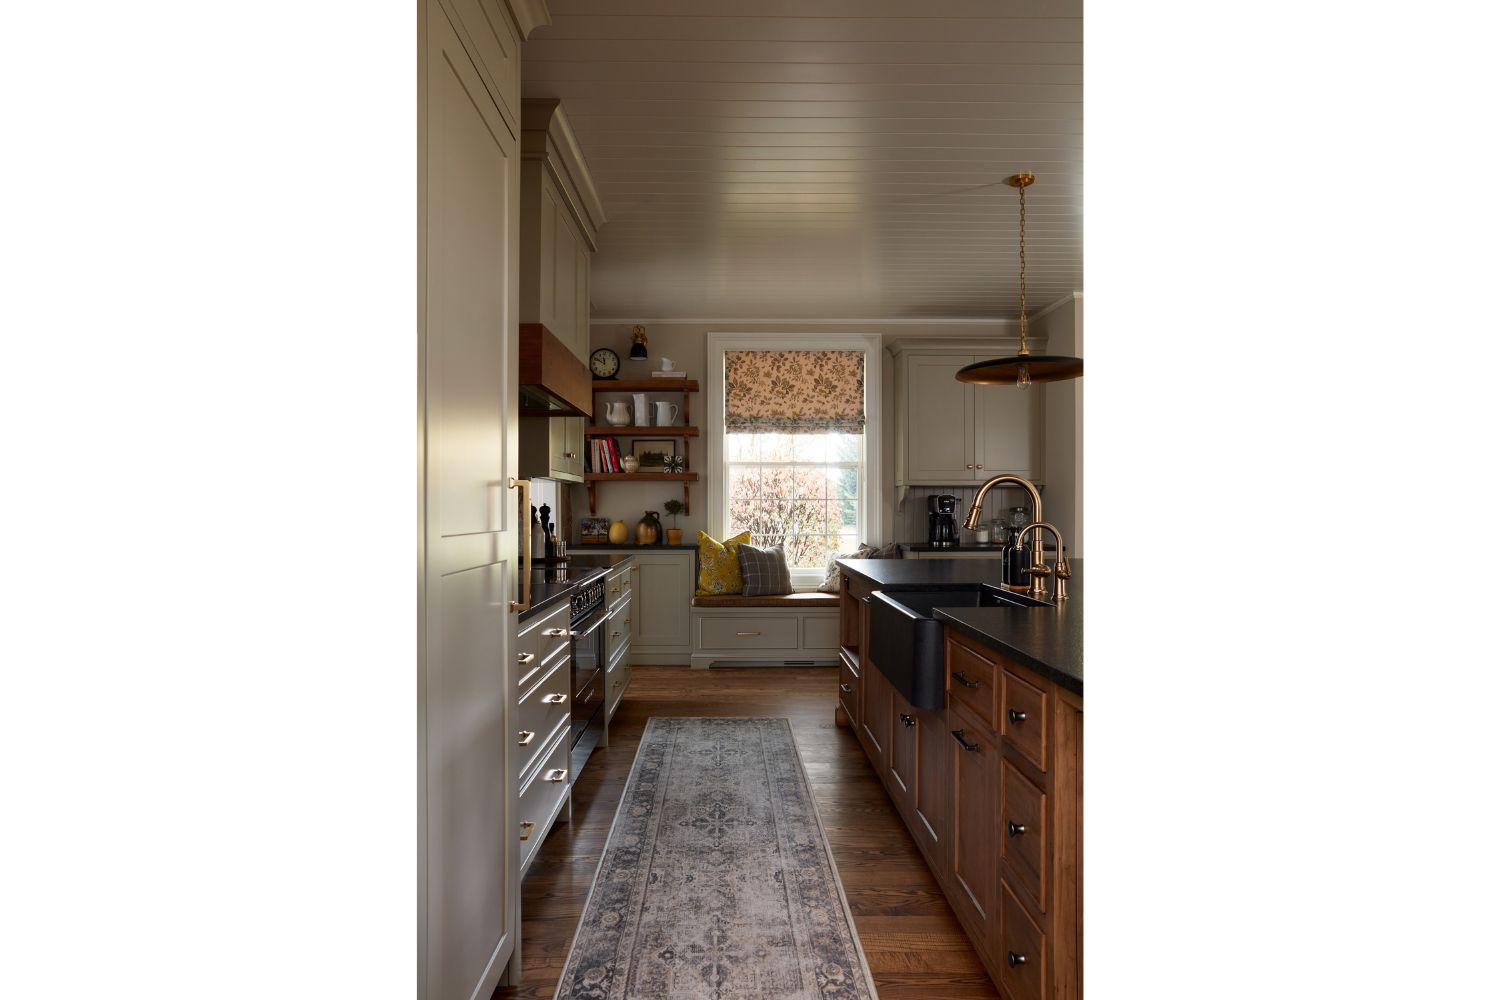 View of painted gray kitchen cabinets and maple window seating